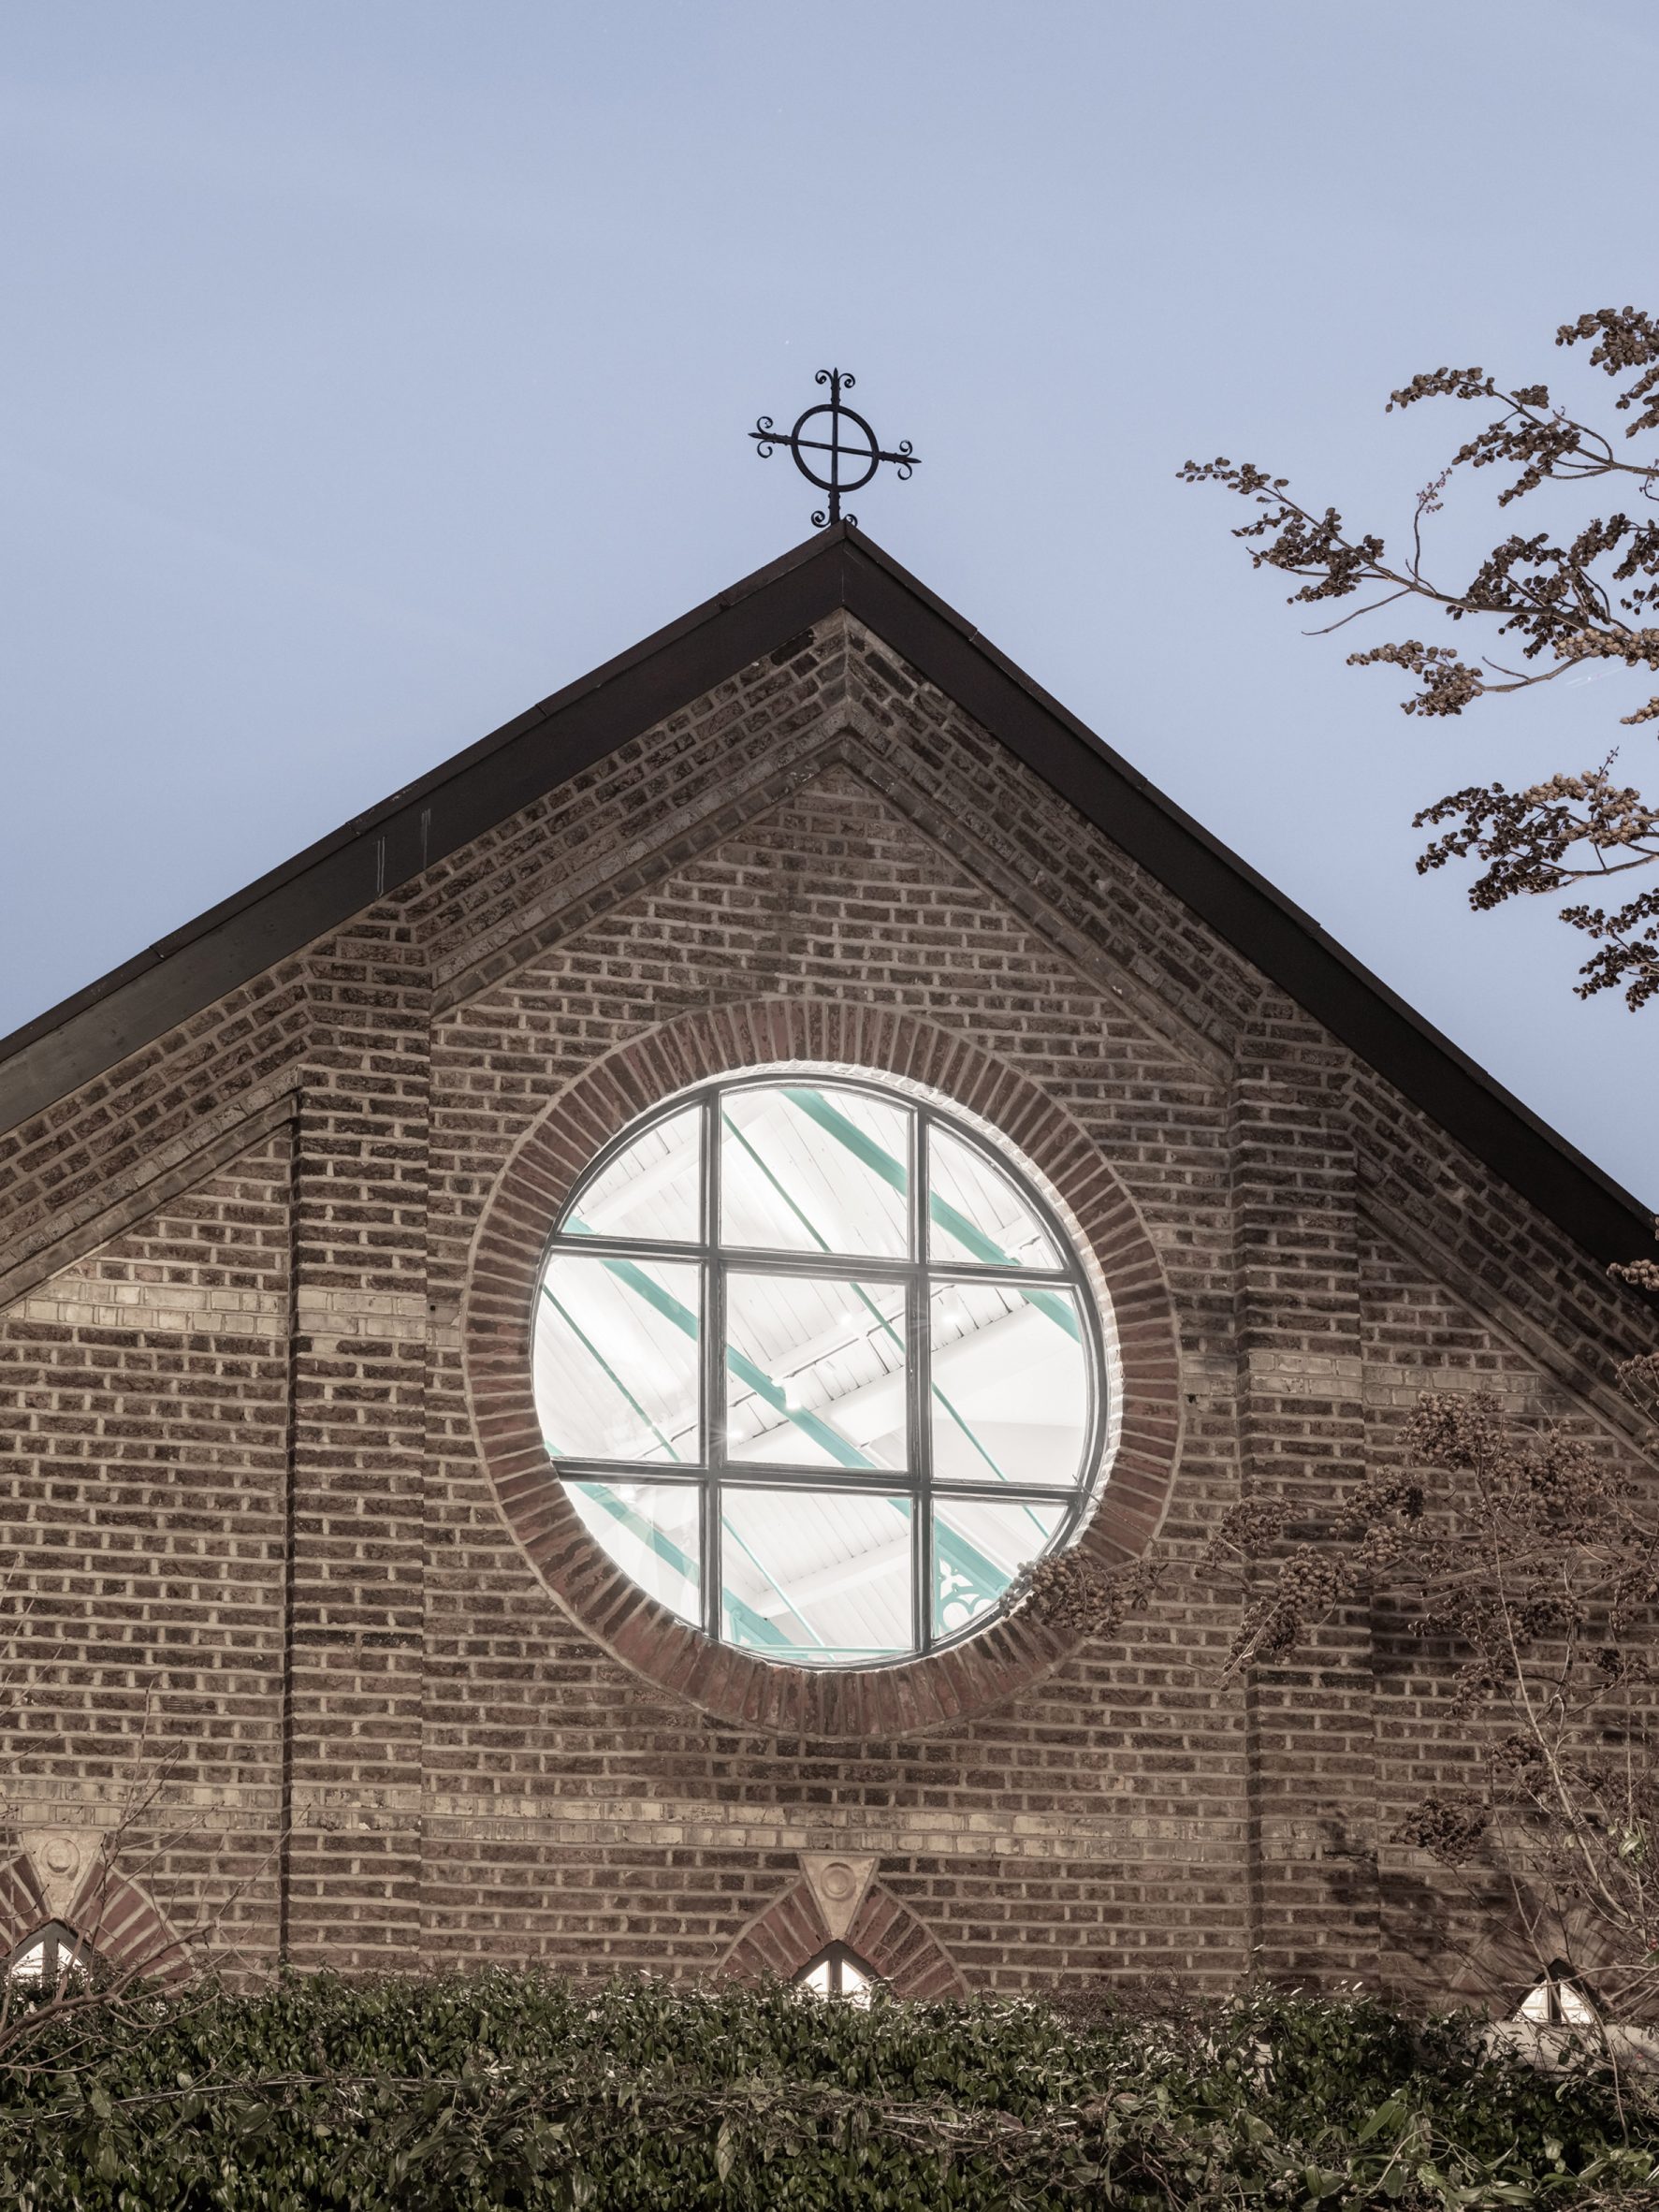 Gable end wall with rose window of Addison Studios by Tigg + Coll Architects